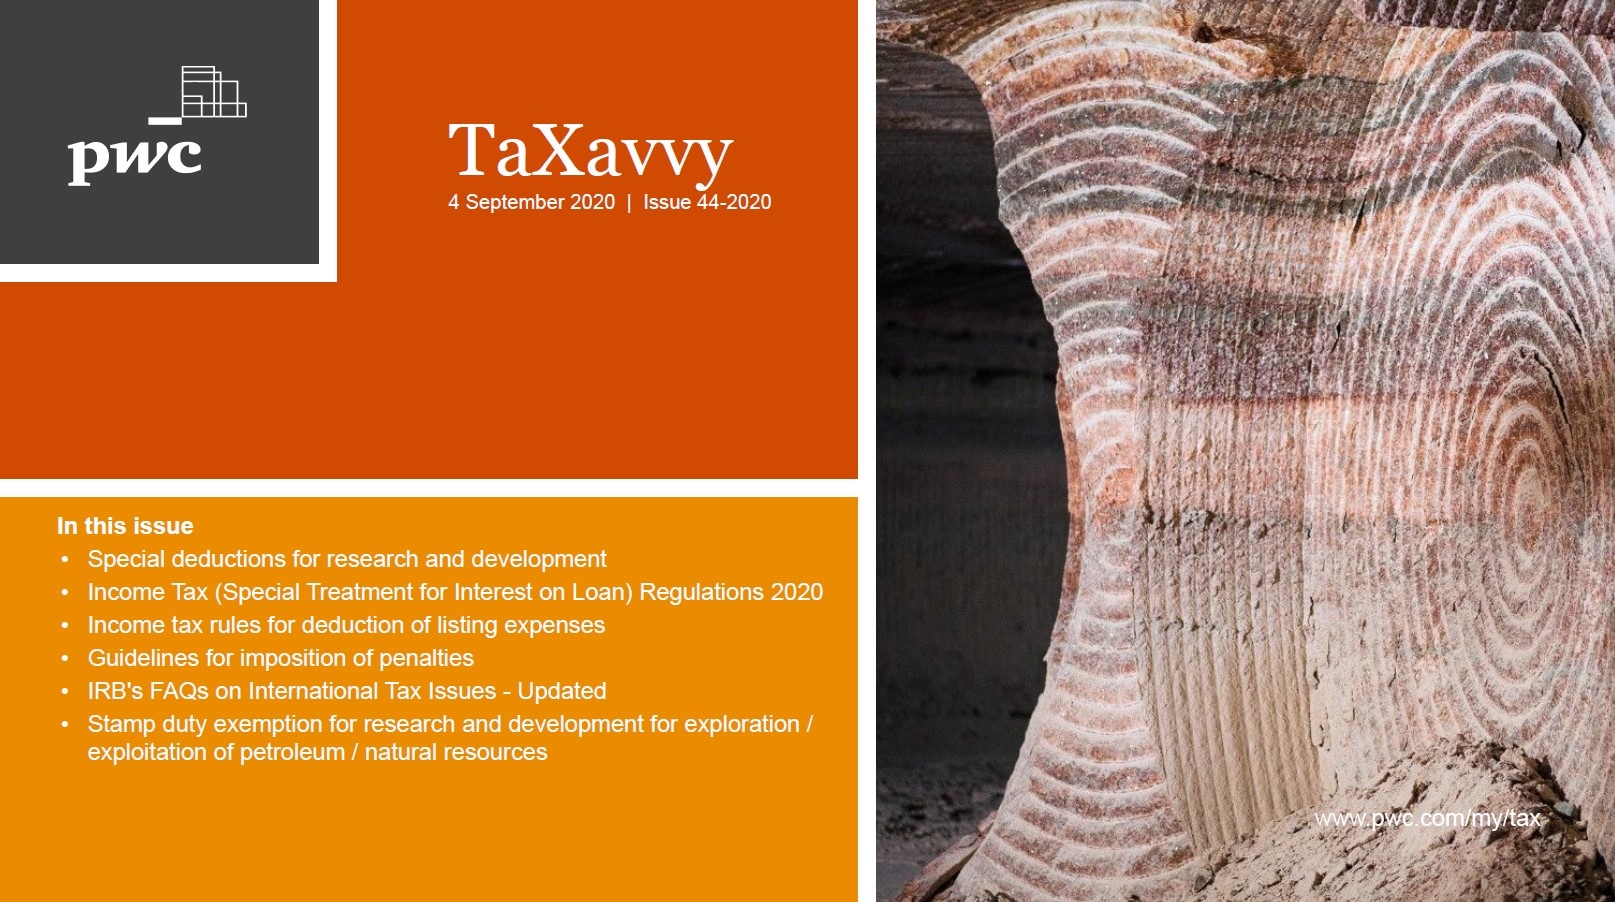 TaXavvy Issue 44/2020